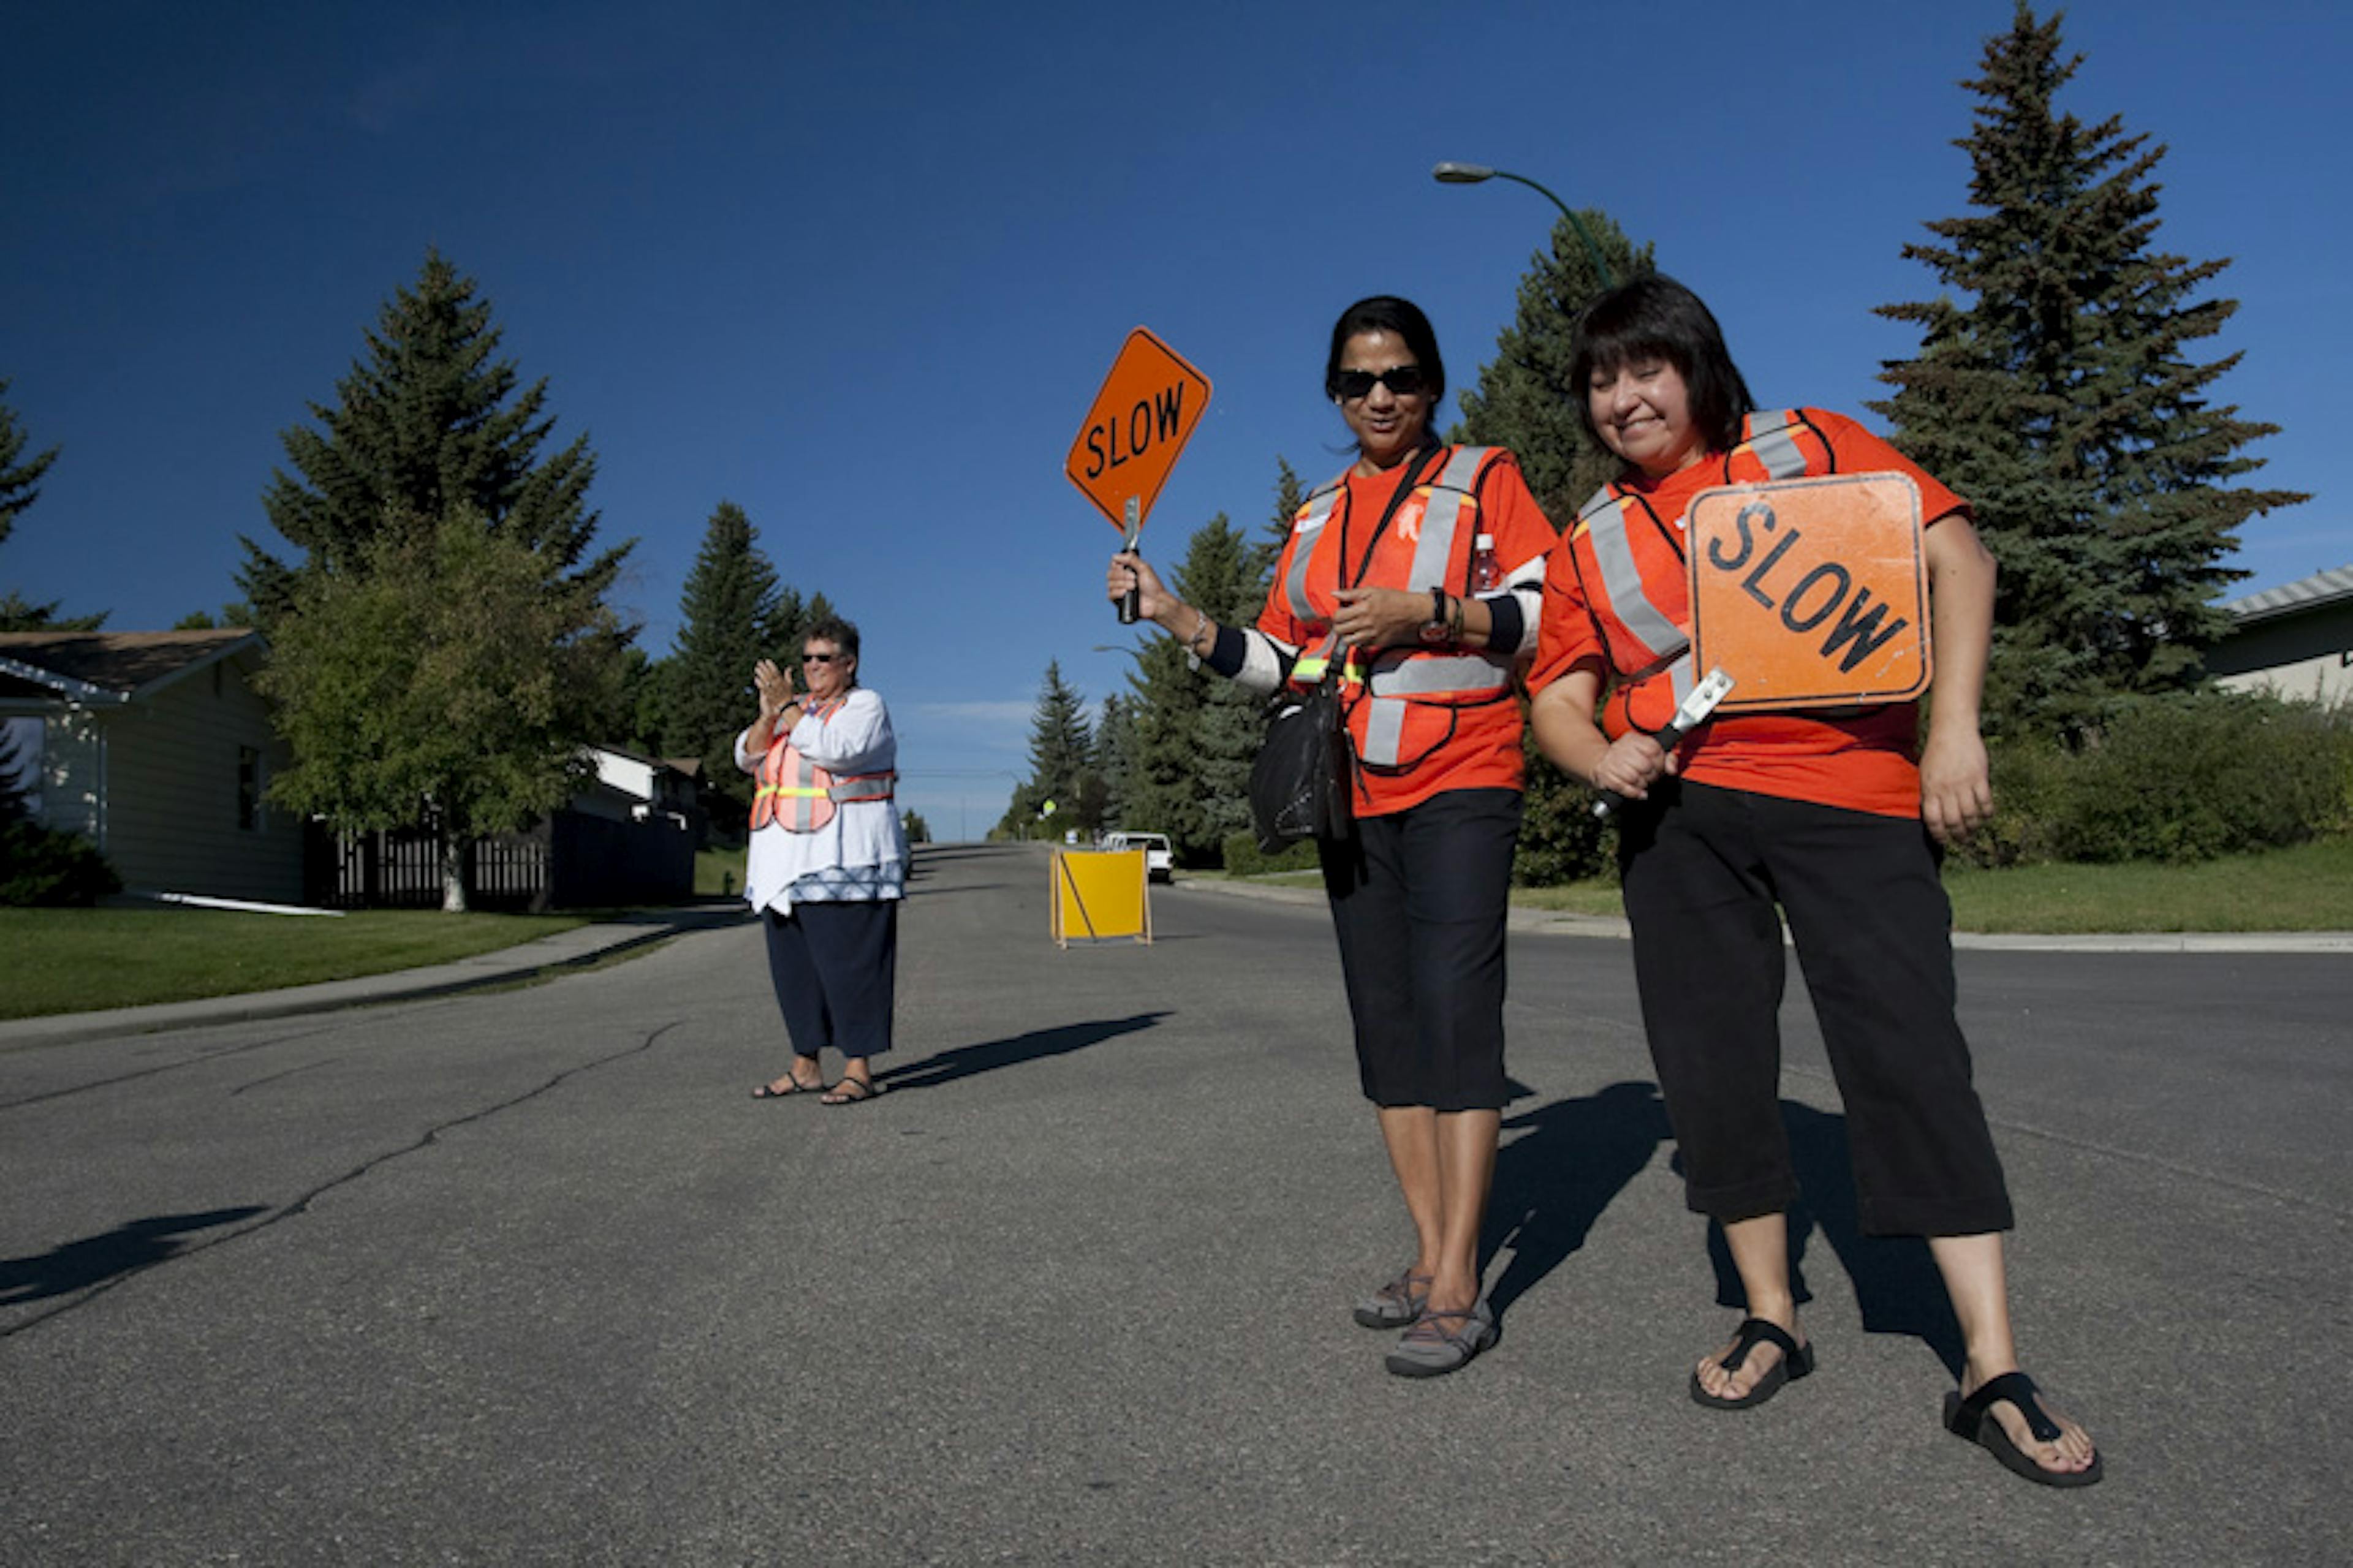  Volunteers holding slow signs at running event